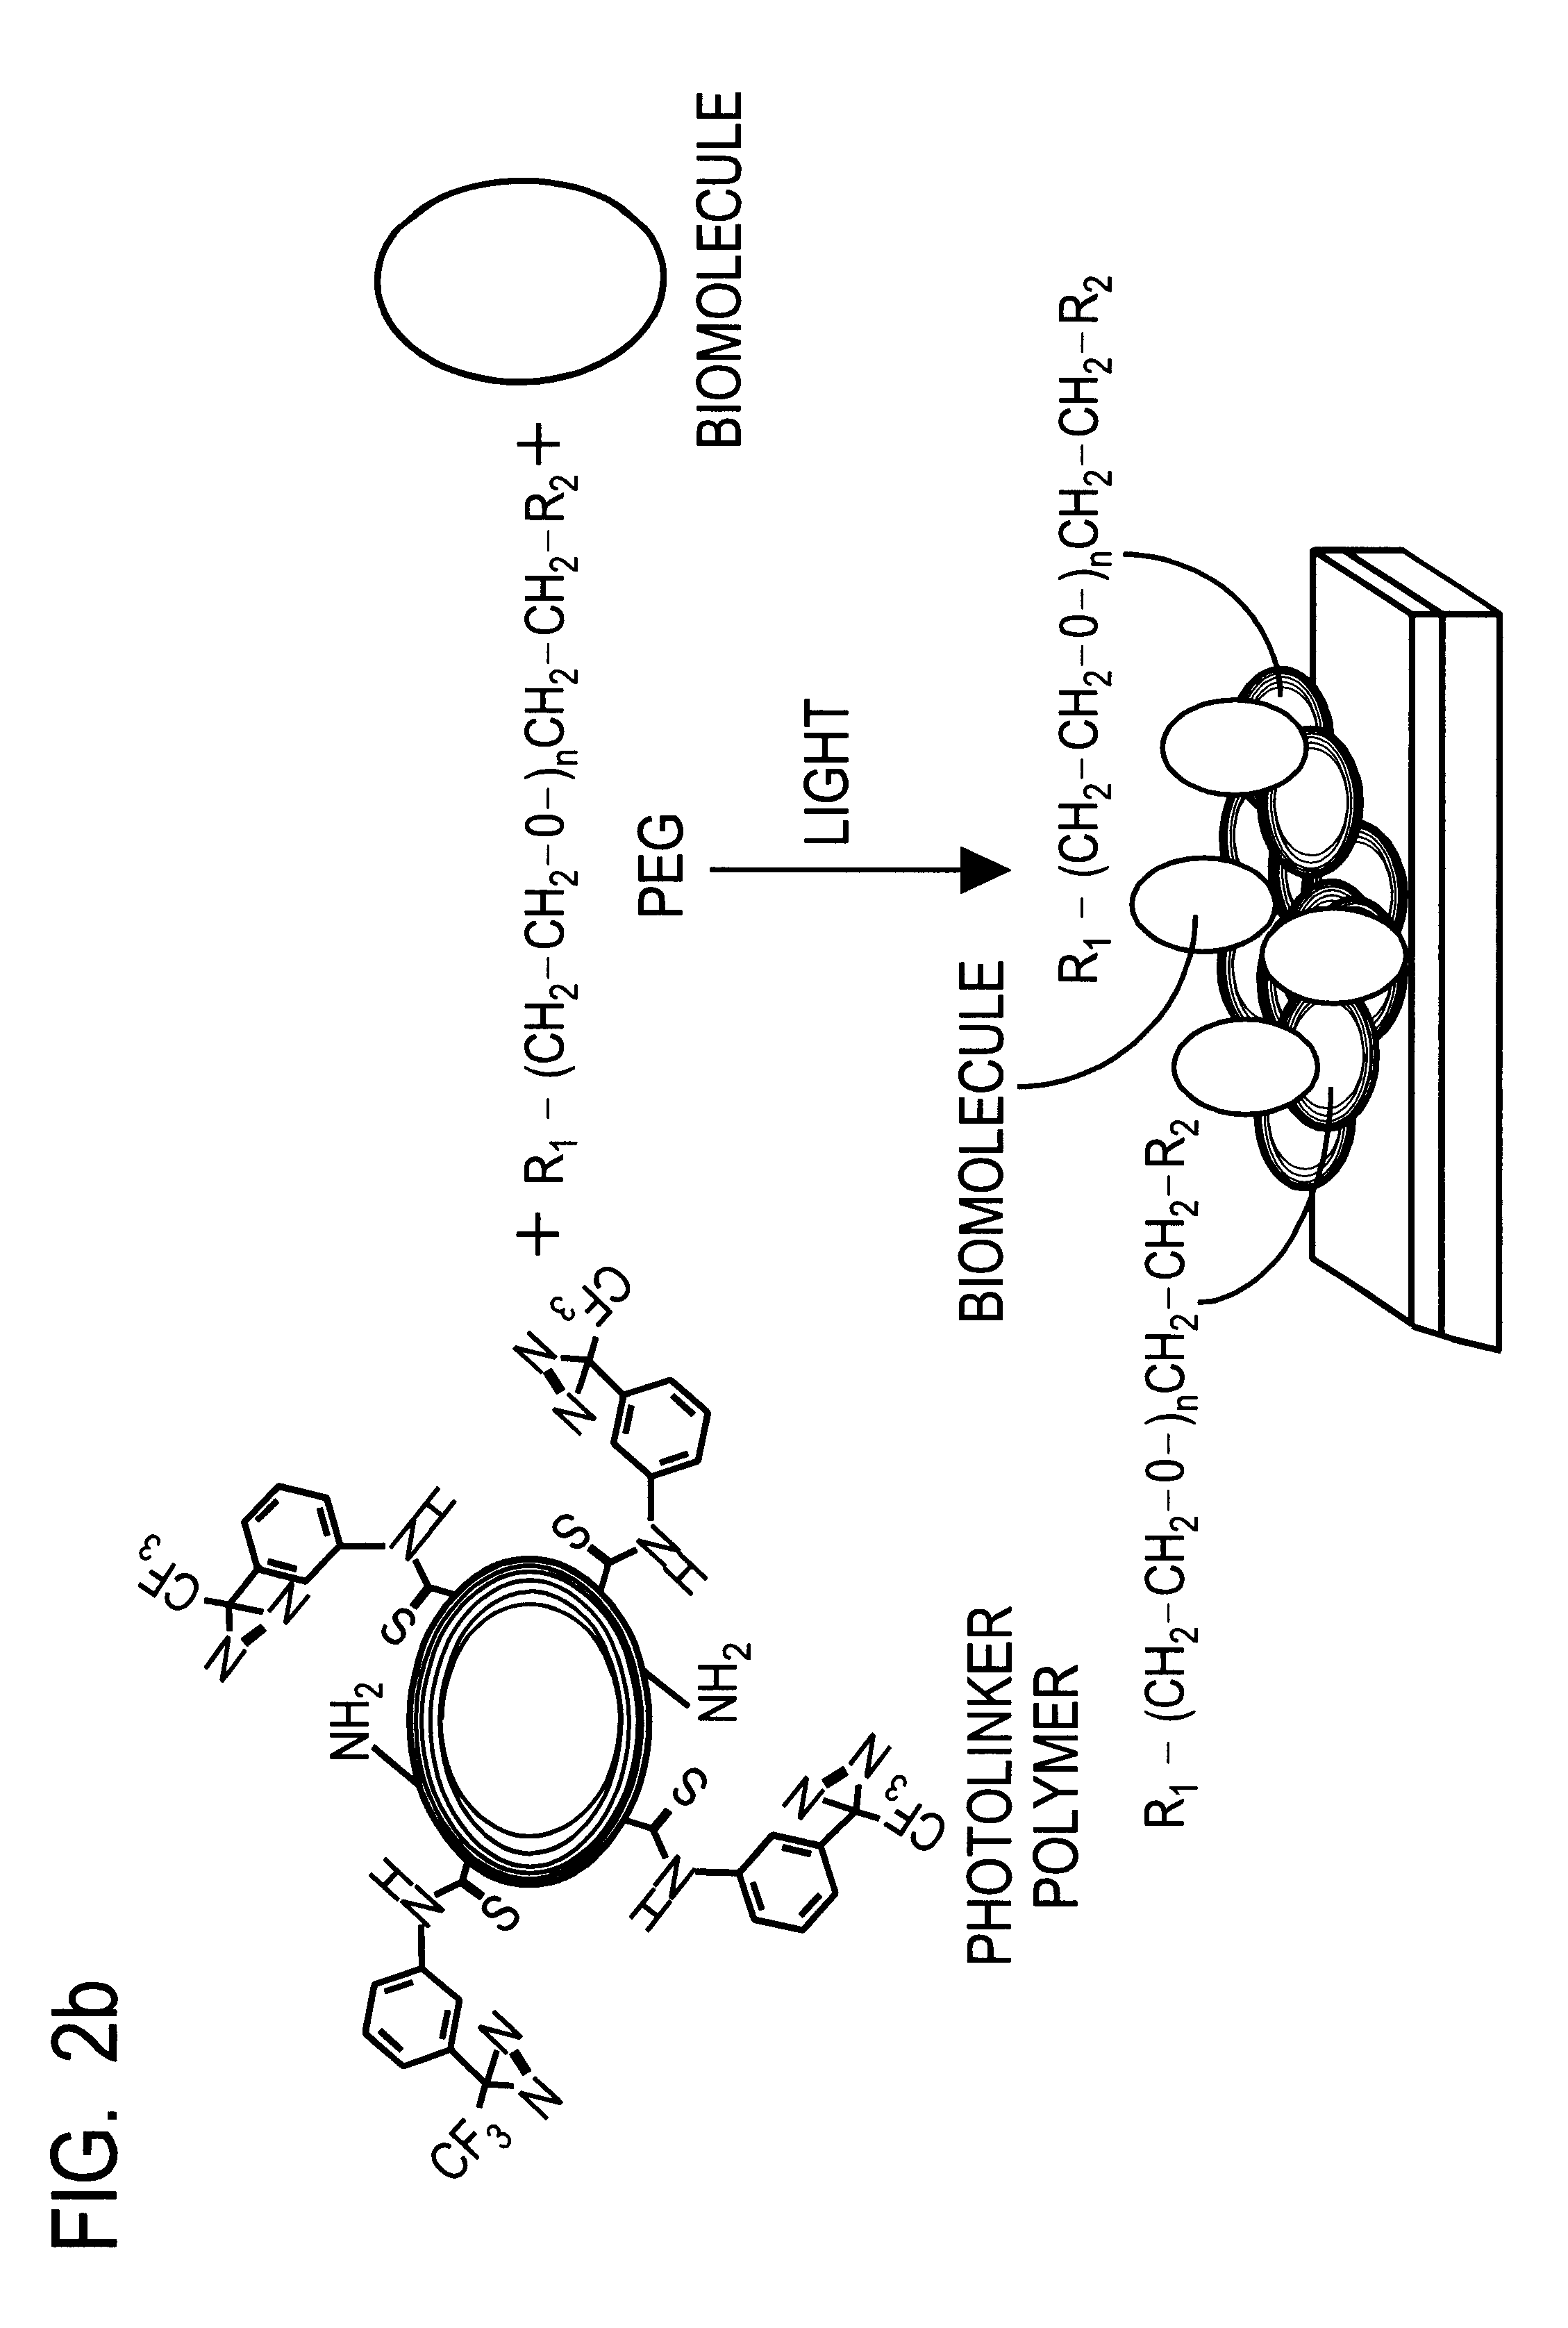 Optical sensor unit and procedure for the ultrasensitive detection of chemical or biochemical analytes